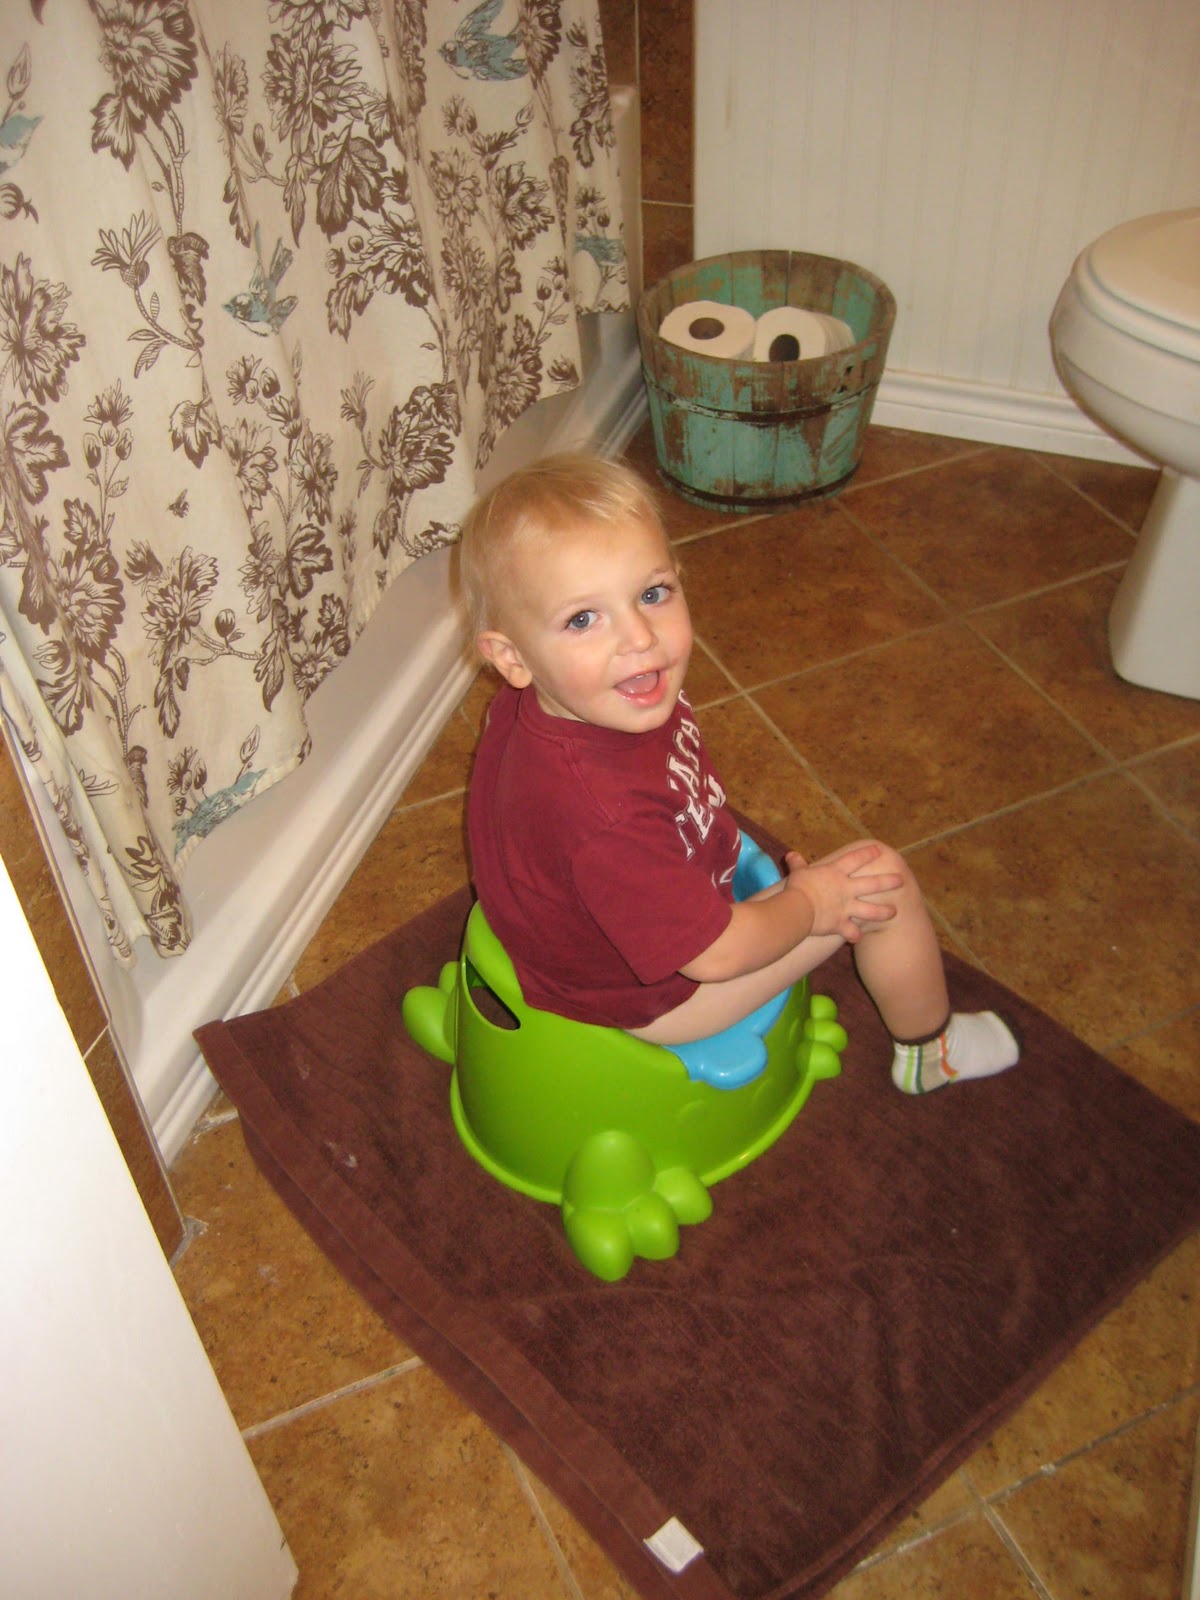 Let's Hear it for the Boys: It's Potty Time...1200 x 1600